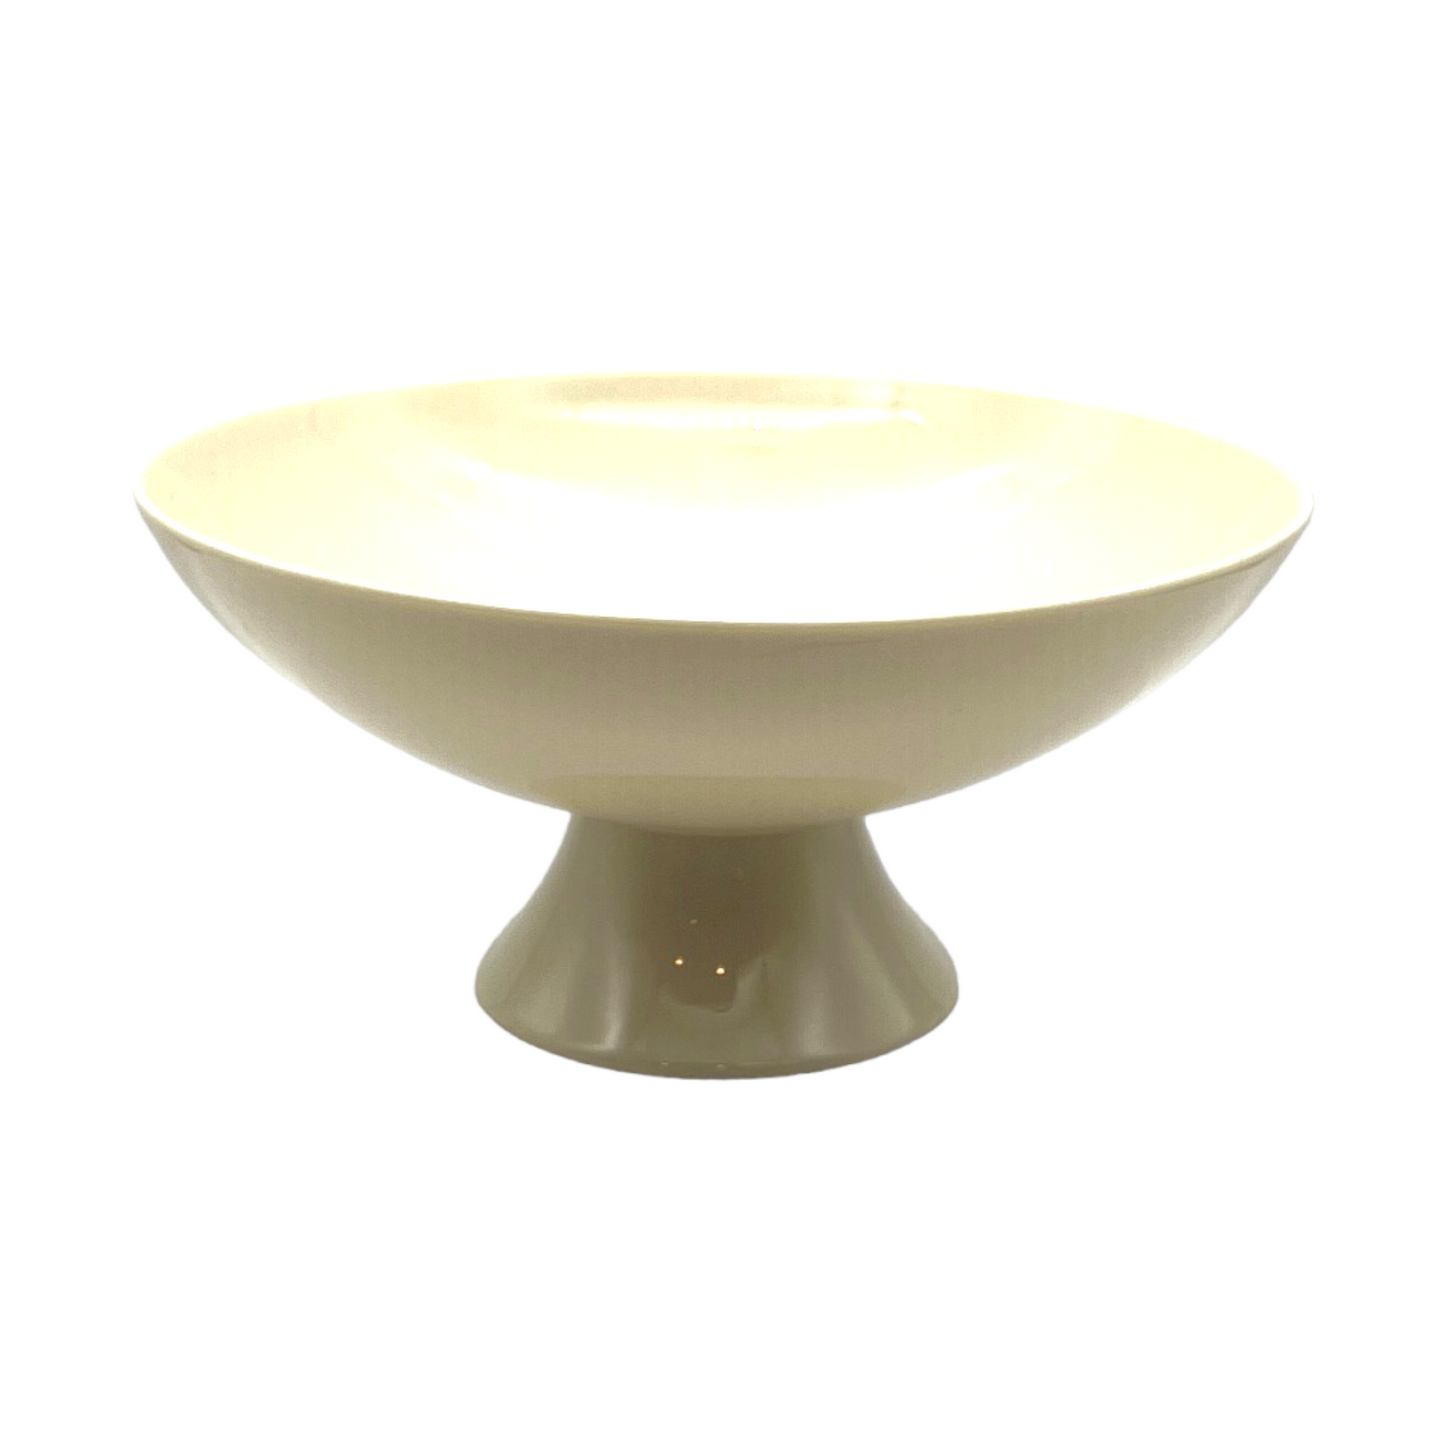 Lenox - Contemporary - Footed Bowl - 3.5"